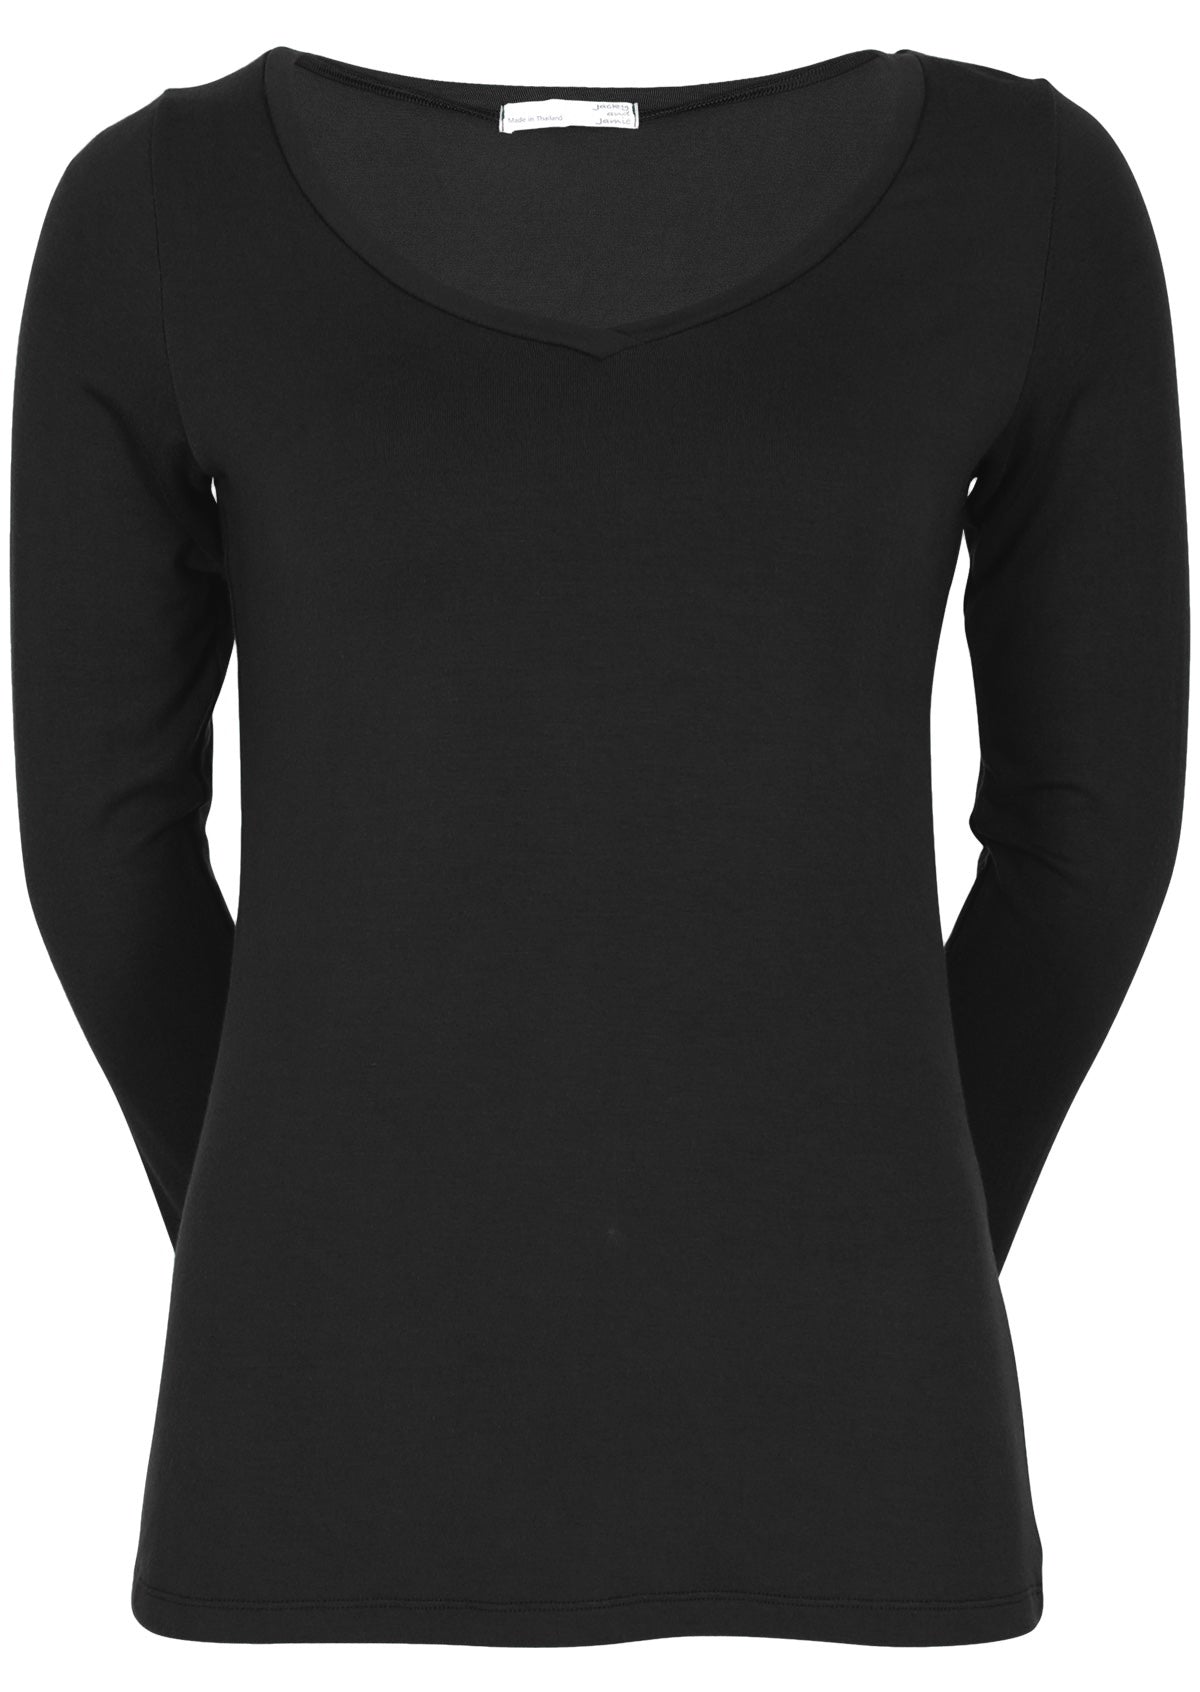 Front view of women's black long sleeve stretch v-neck soft rayon top.